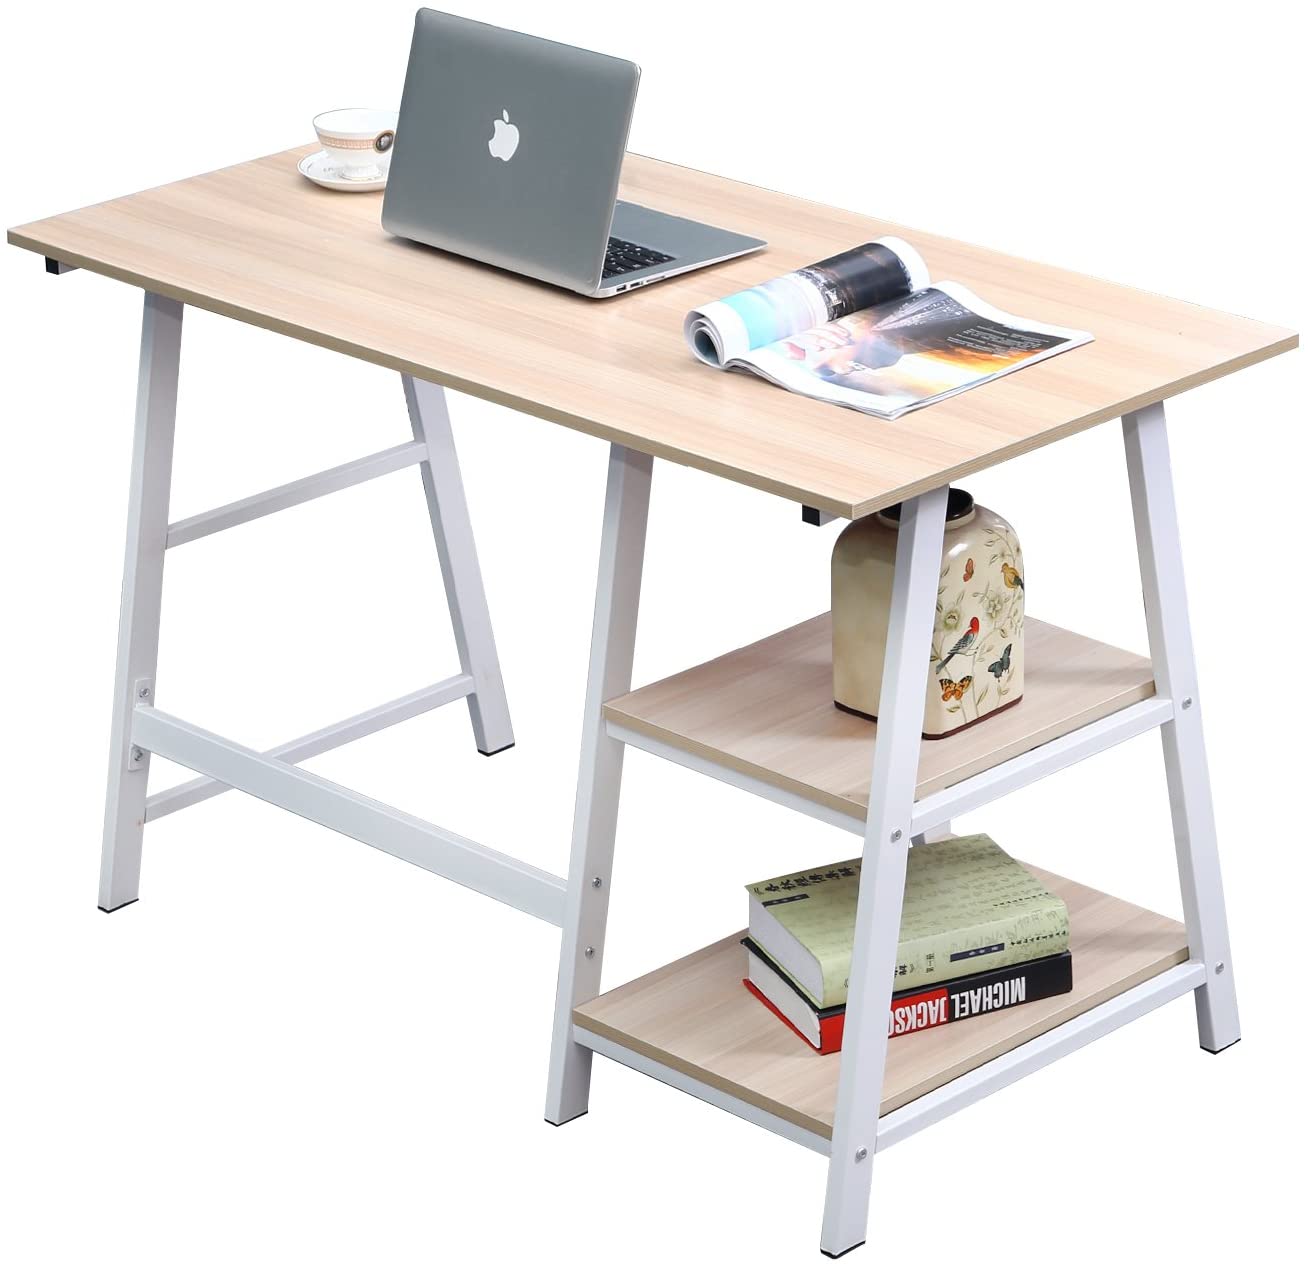 SogesPower 47in Office Desk with Storage for Home Office Student Writing Desk- Beige